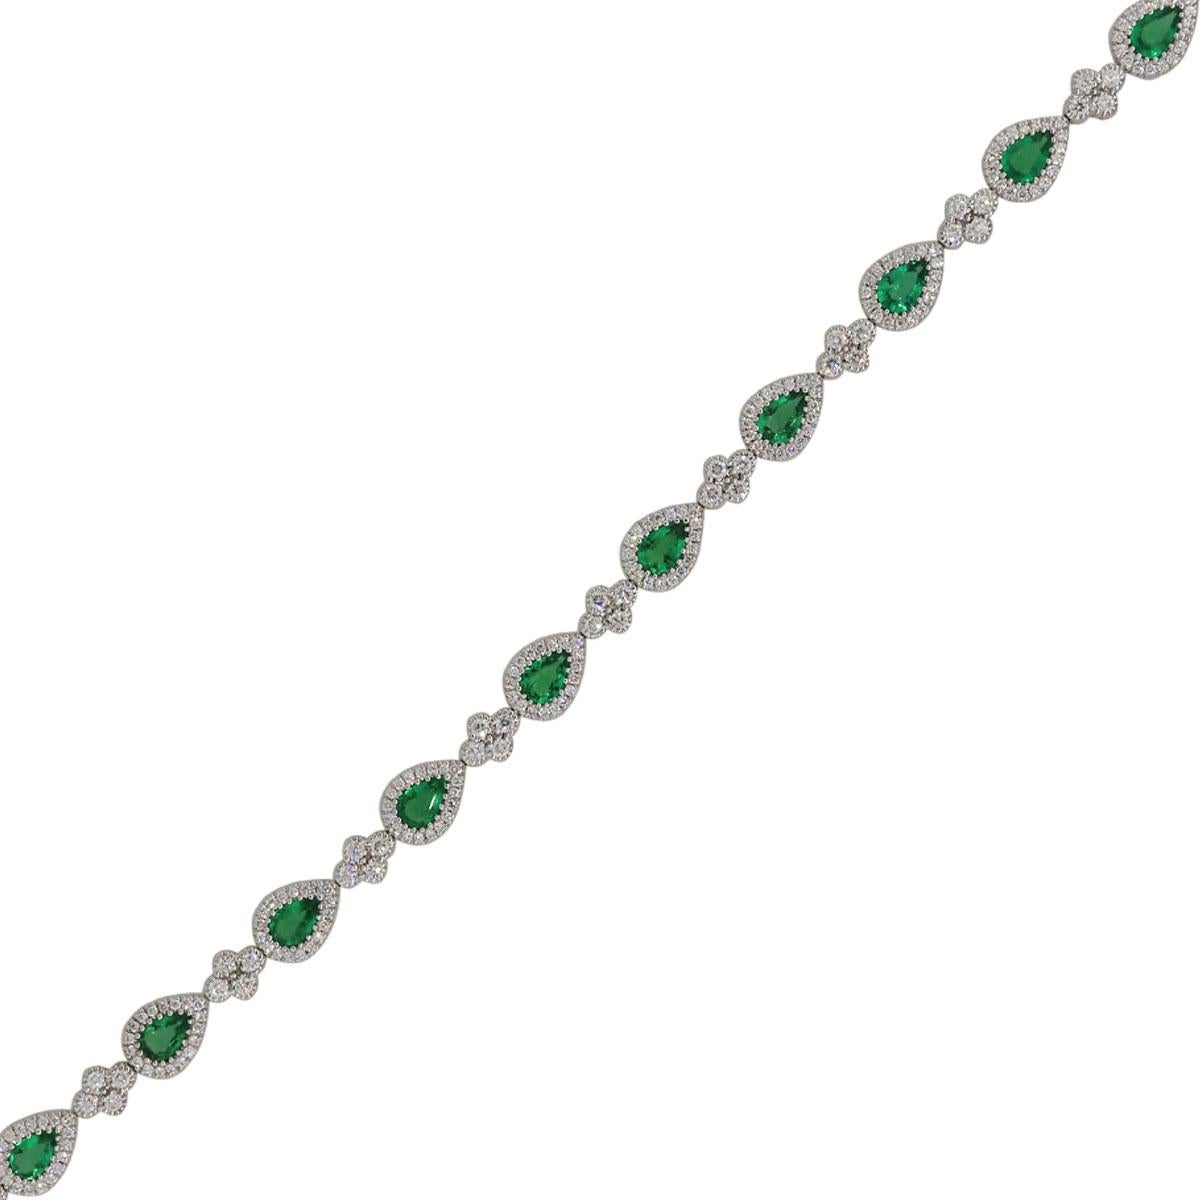 Material: 18k White Gold
Diamond Details: Approximately 2.18ctw of round brilliant diamonds. Diamonds are G/H in color and SI in clarity
Gemstone Details: Approximately 3.29tw of pear shape emeralds
Wrist size: Will fit up to a 7.25″